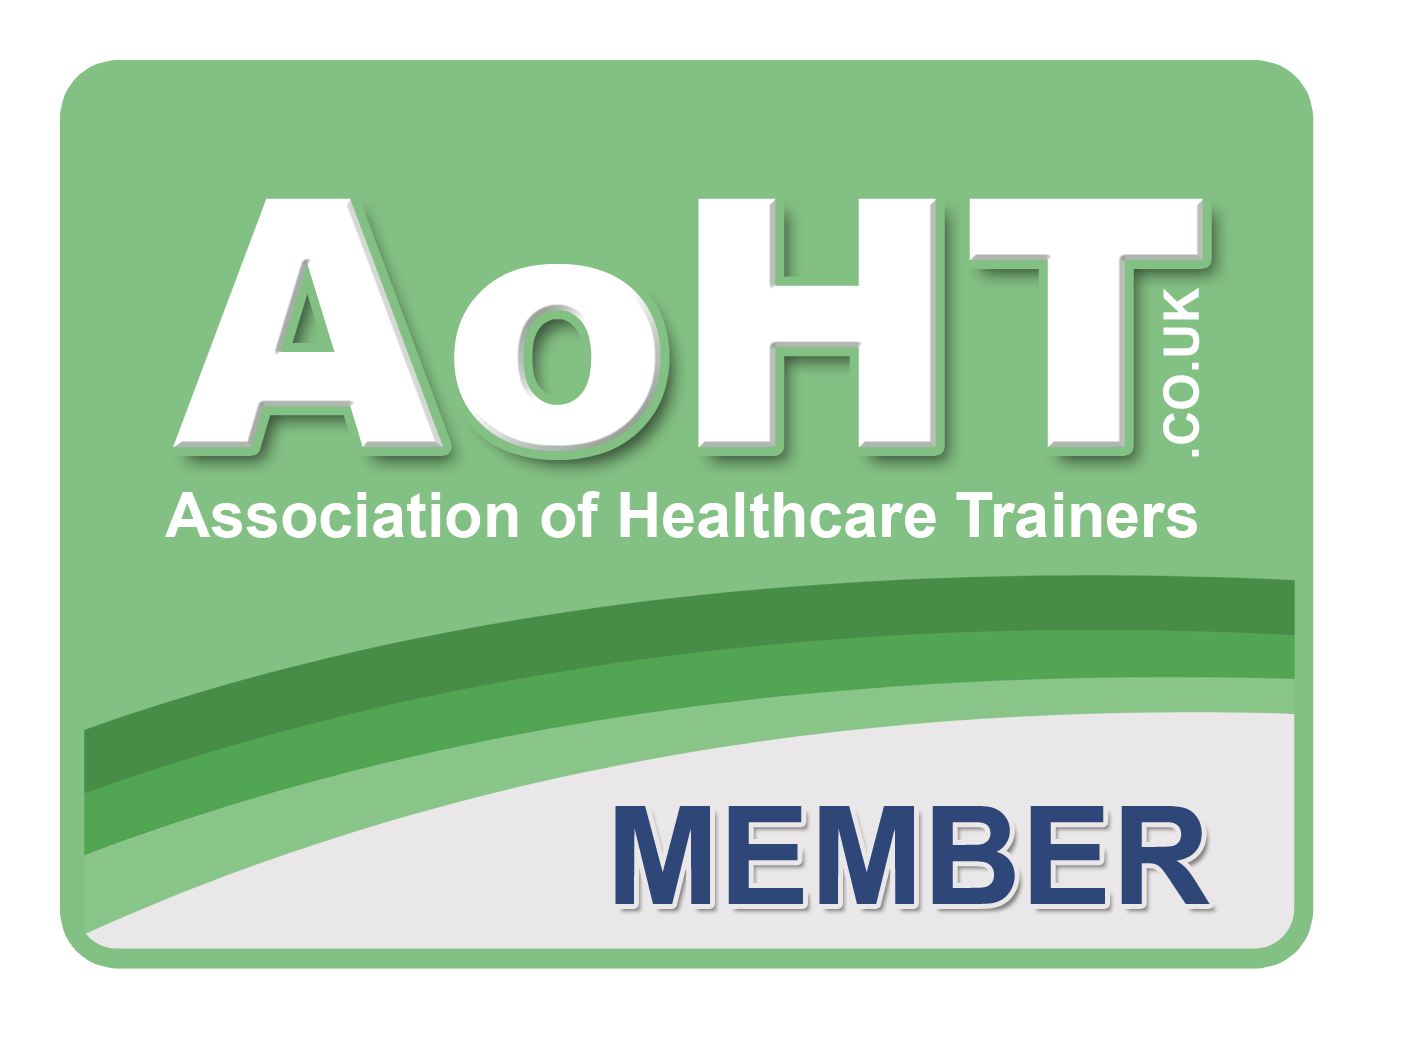 Association of Healthcare Trainers Member